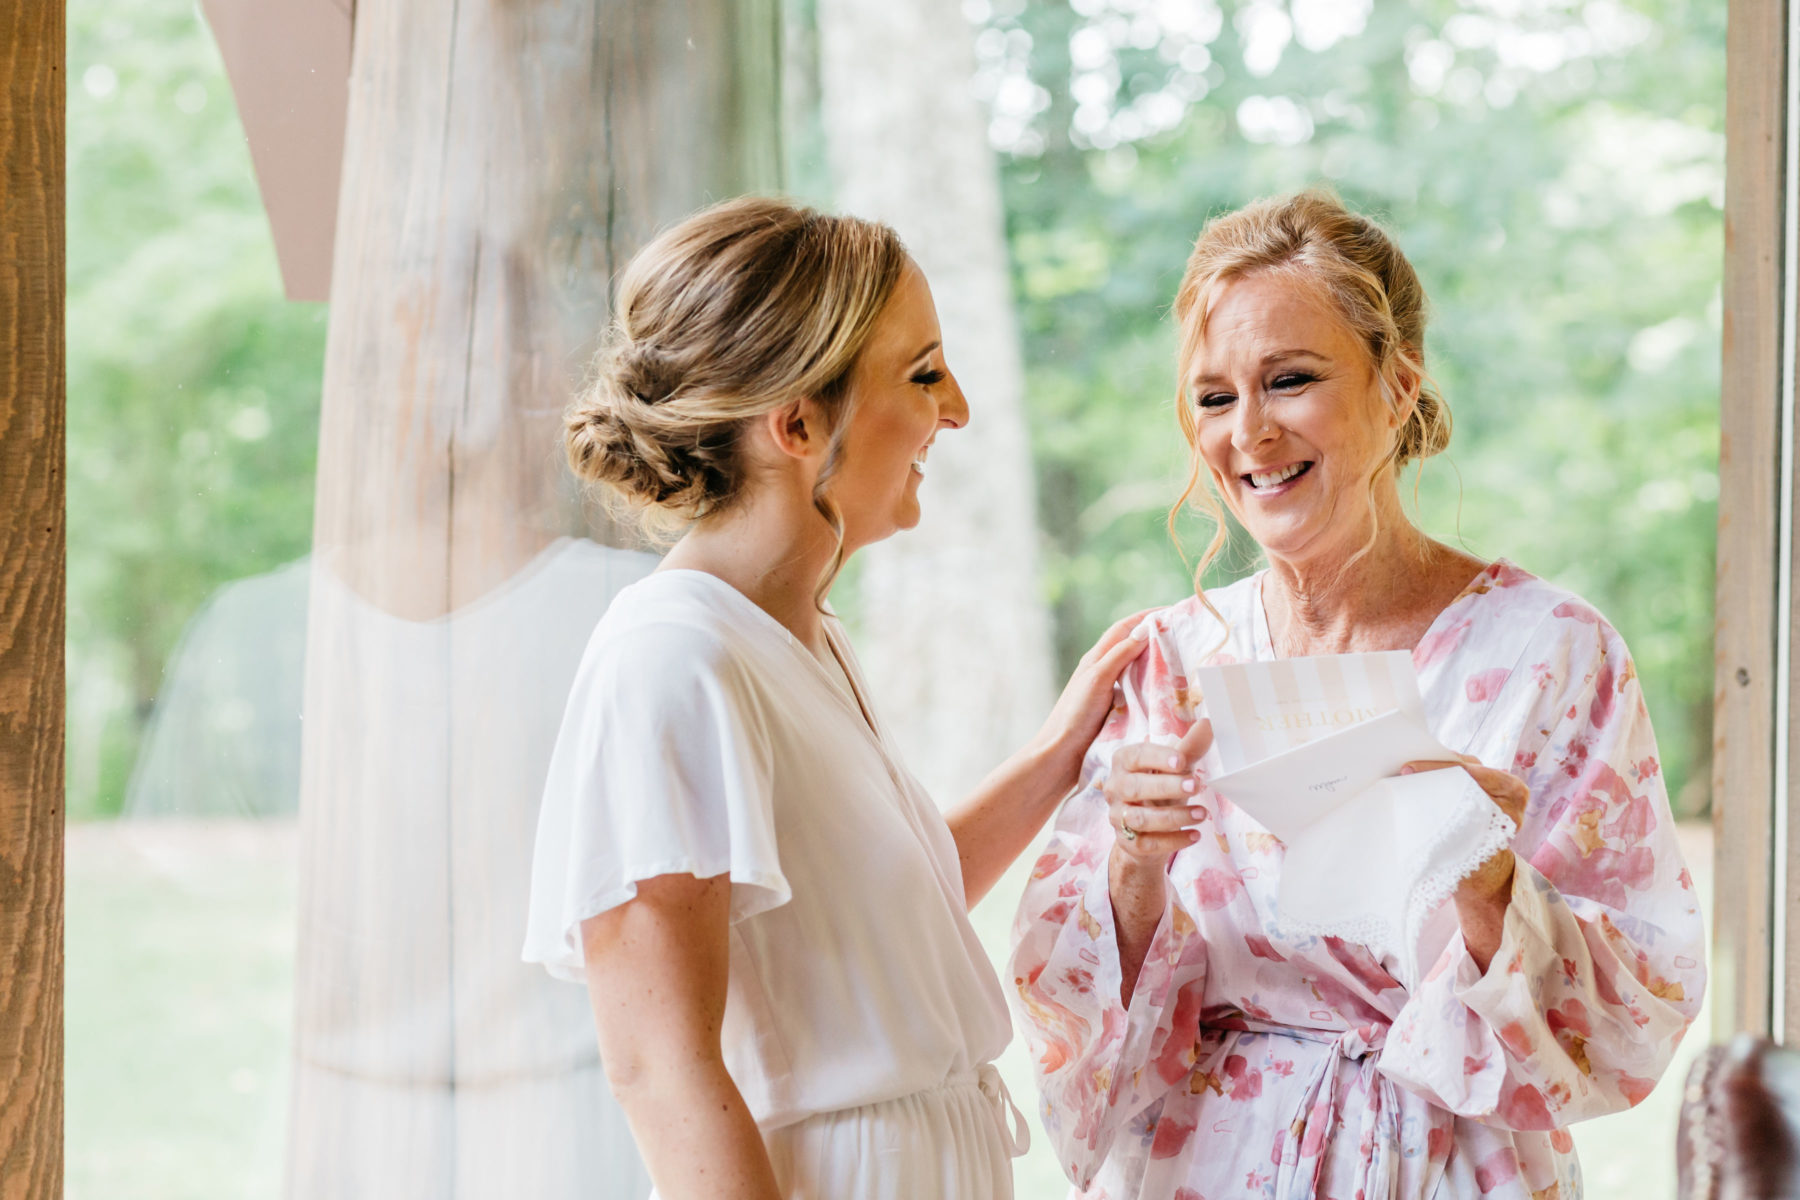 Mother/daughter wedding photos: Rustic Front Porch Farms wedding featured on Nashville Bride Guide